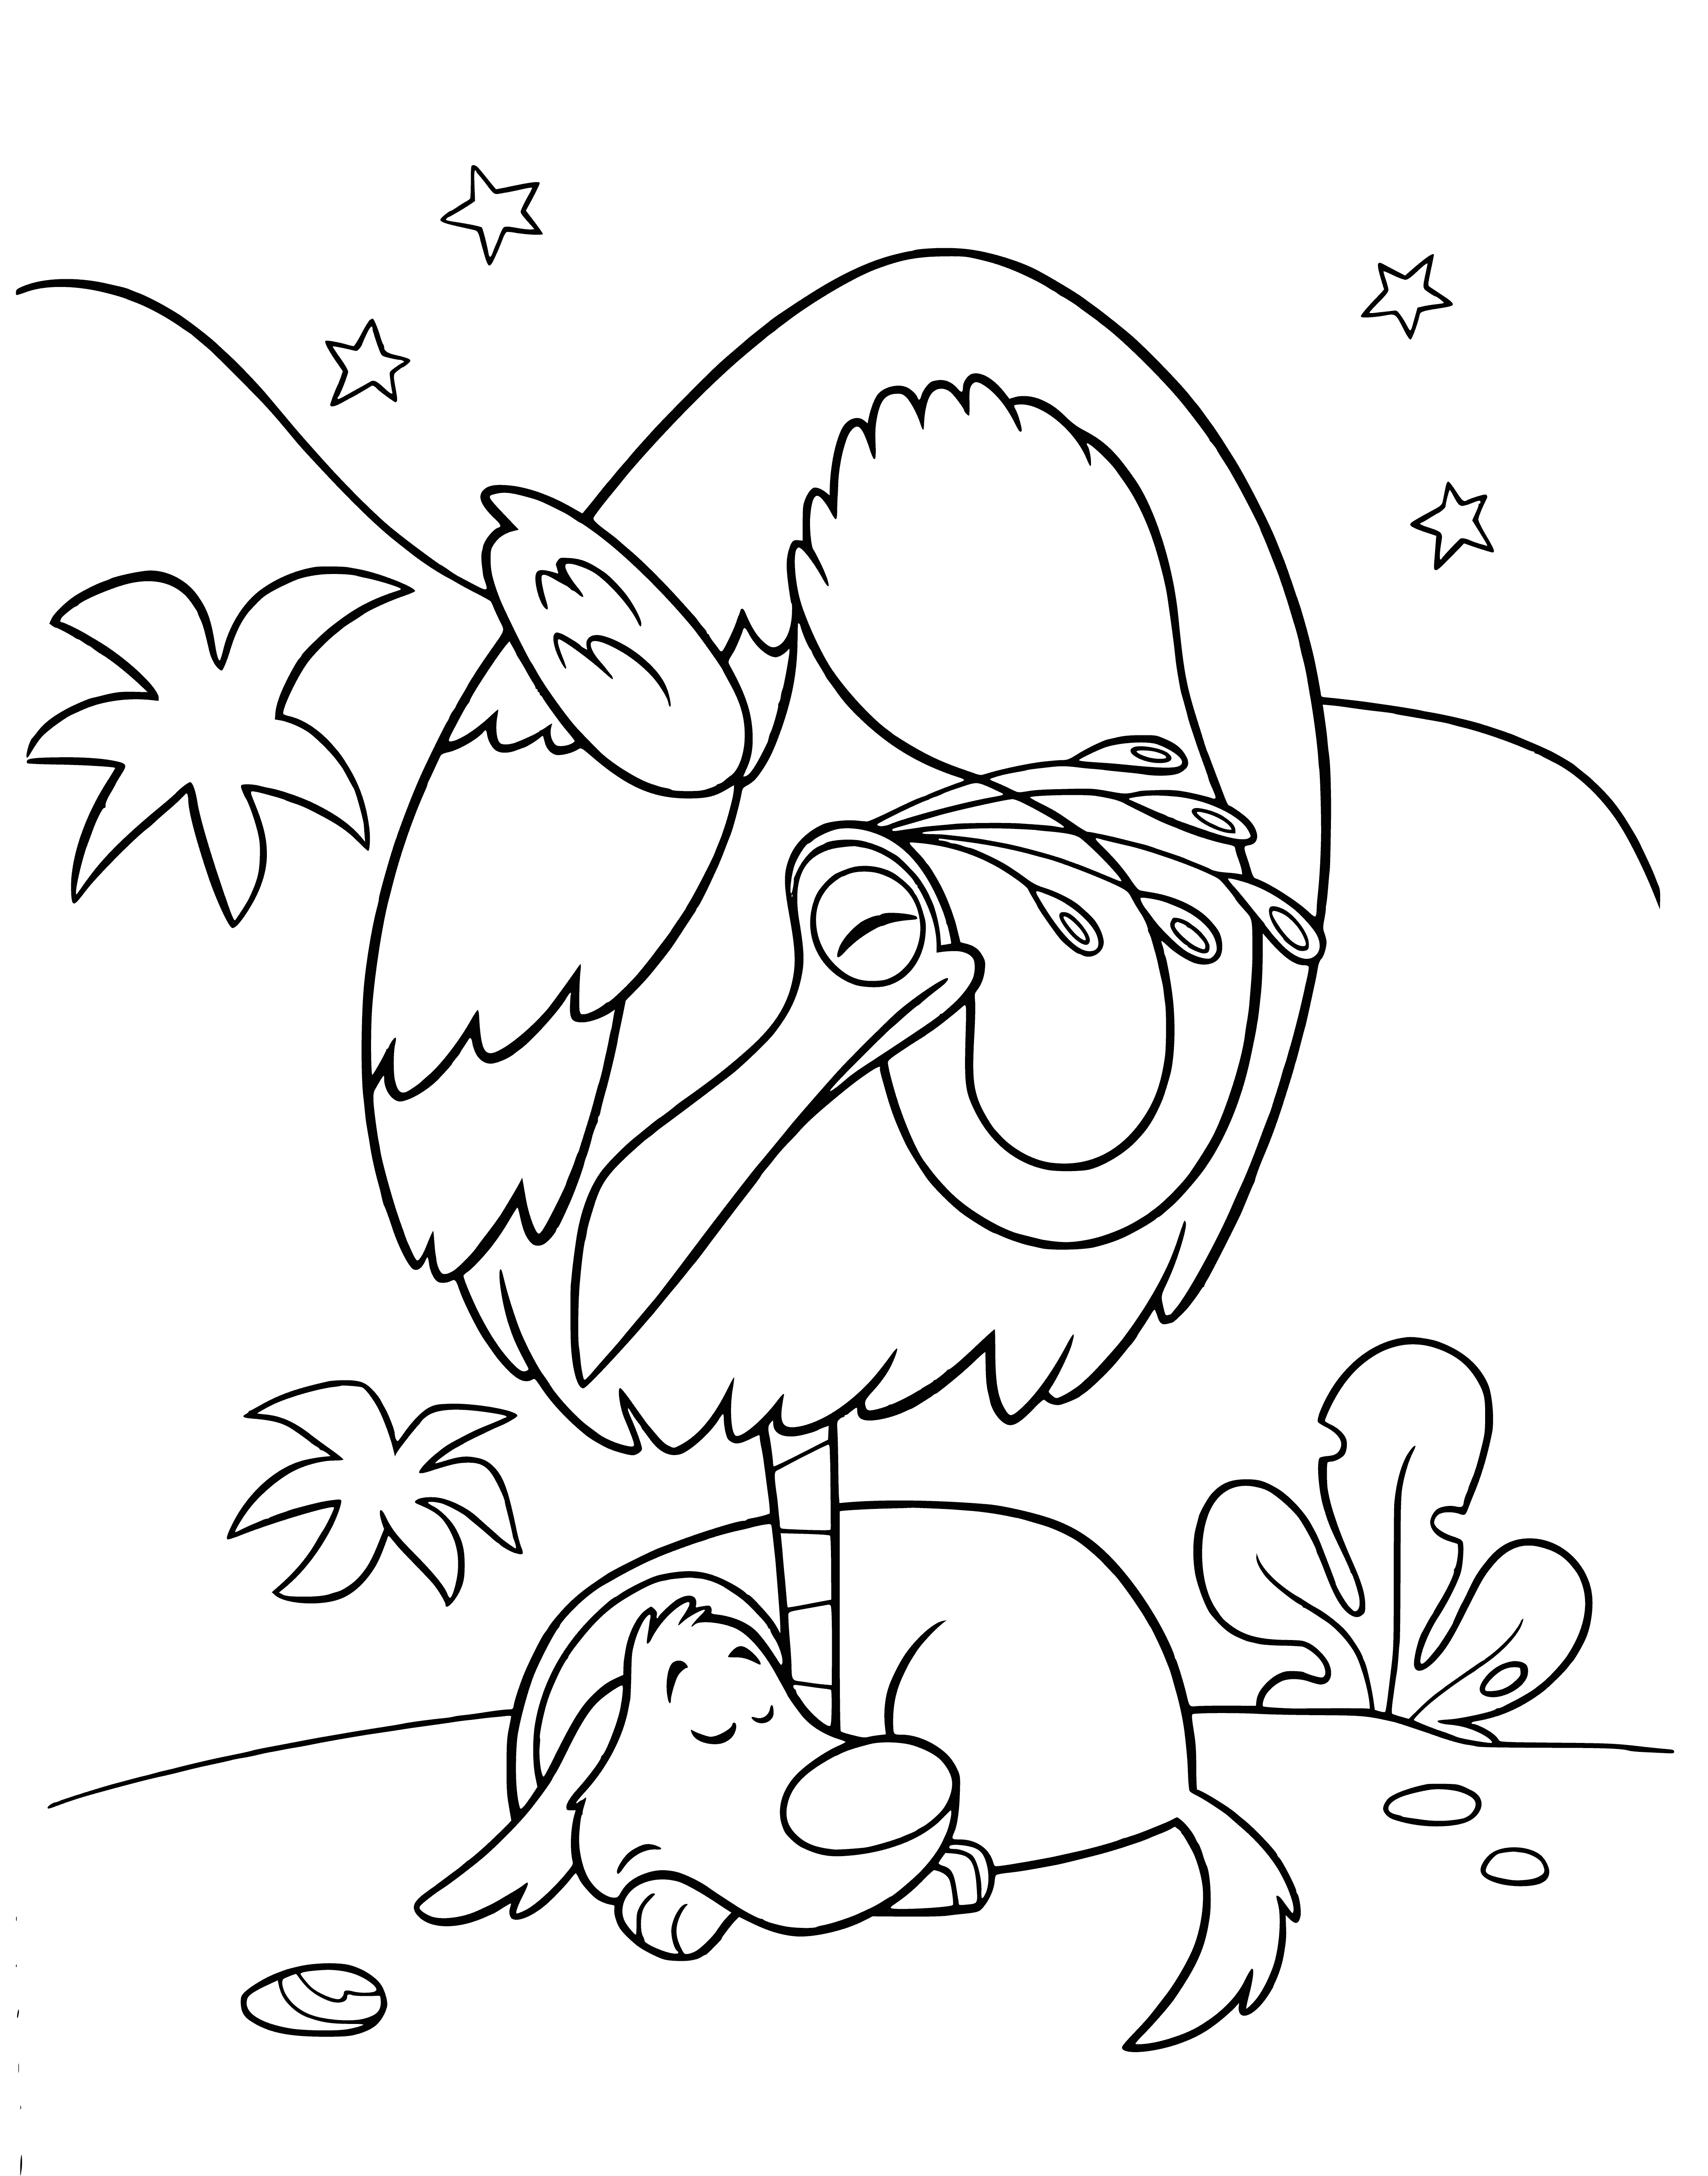 Bird and dog coloring page